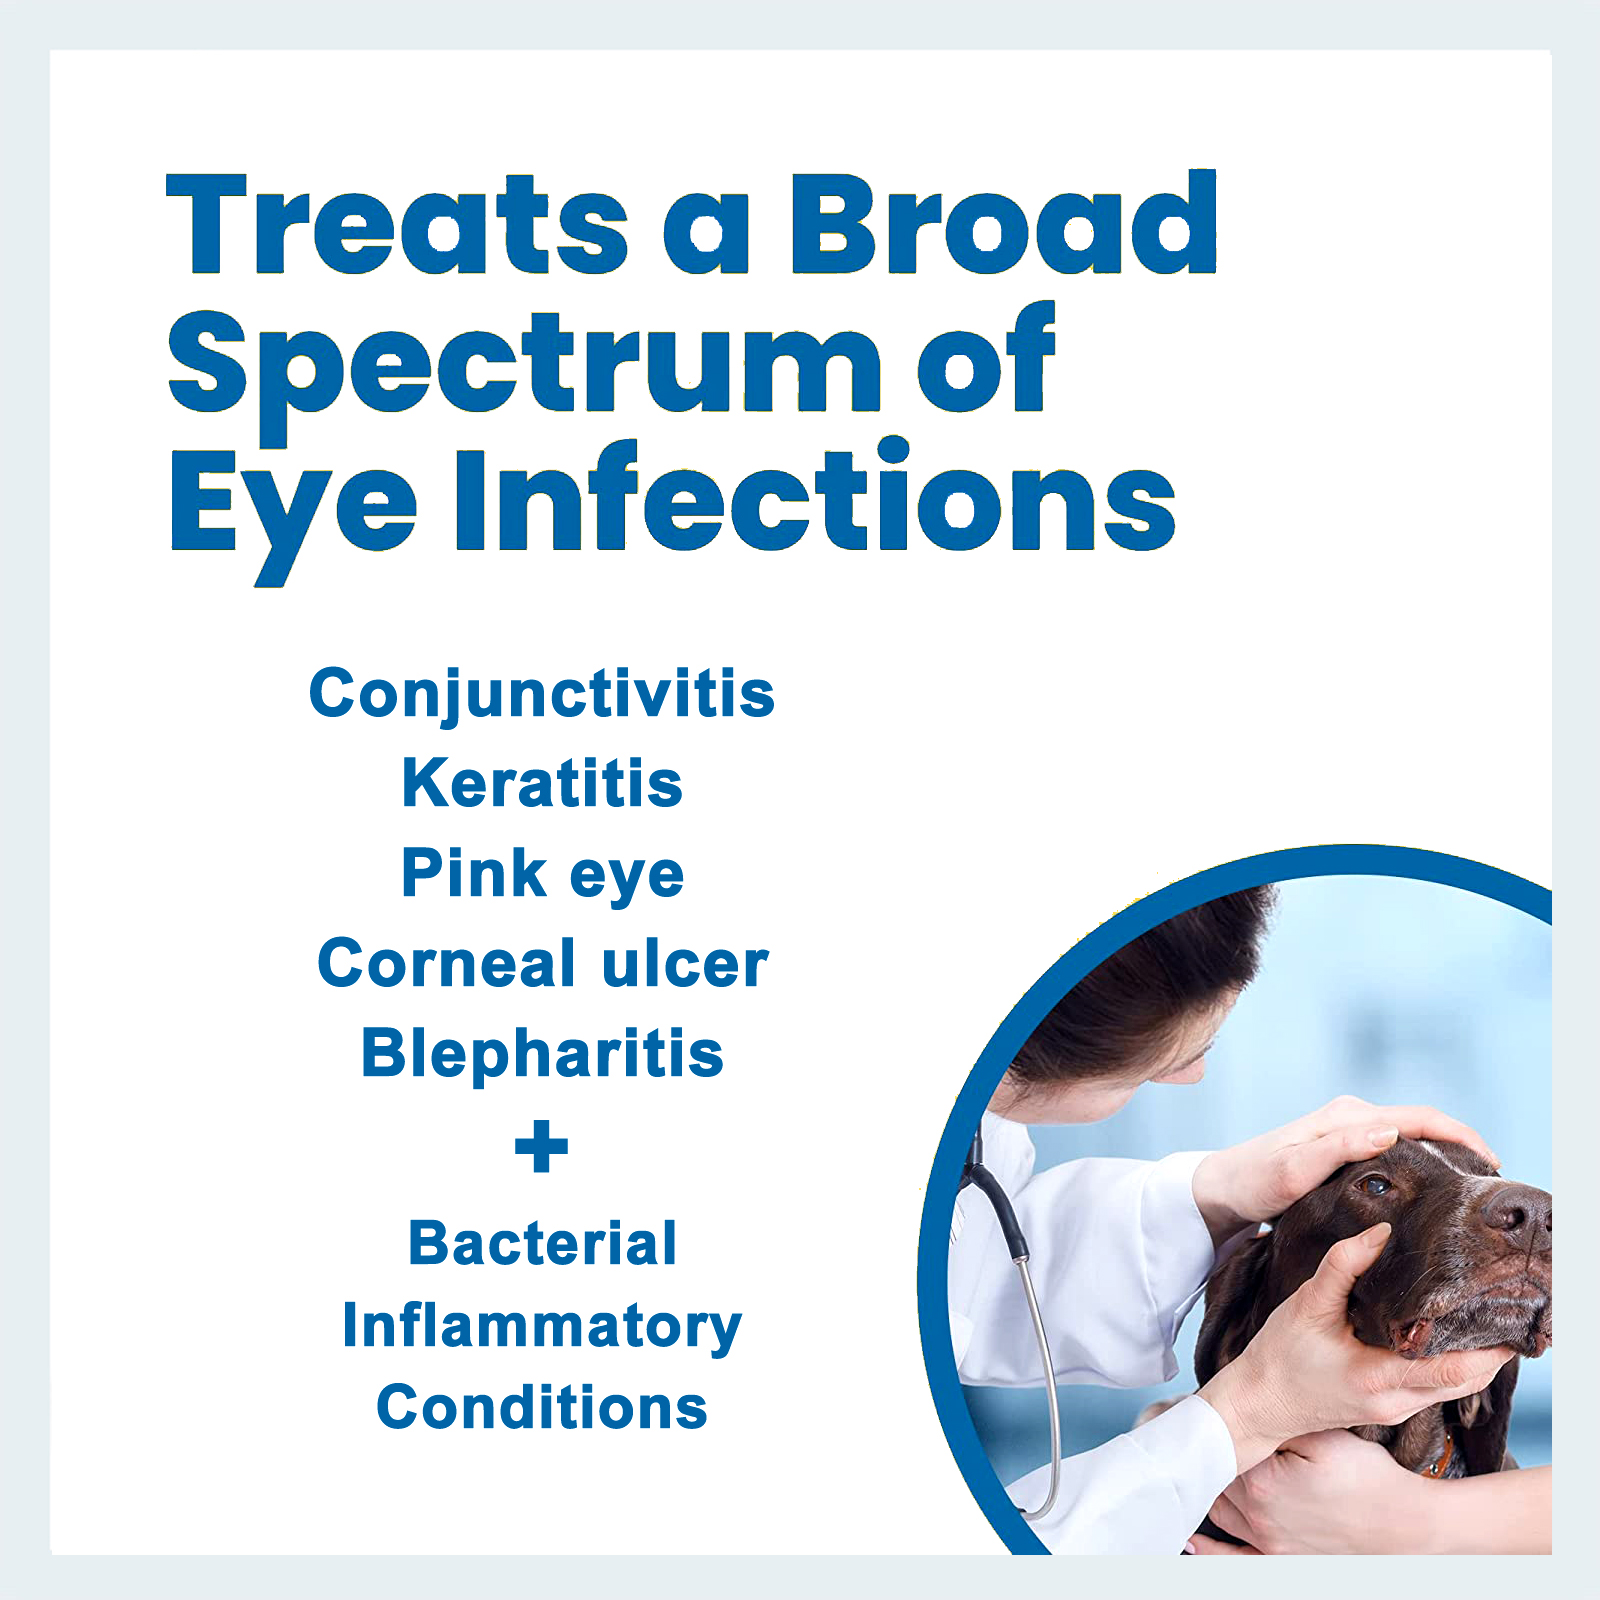 Terramycin Antibiotic Ointment for Eye Infection Treatment in Dogs Cats and Horses